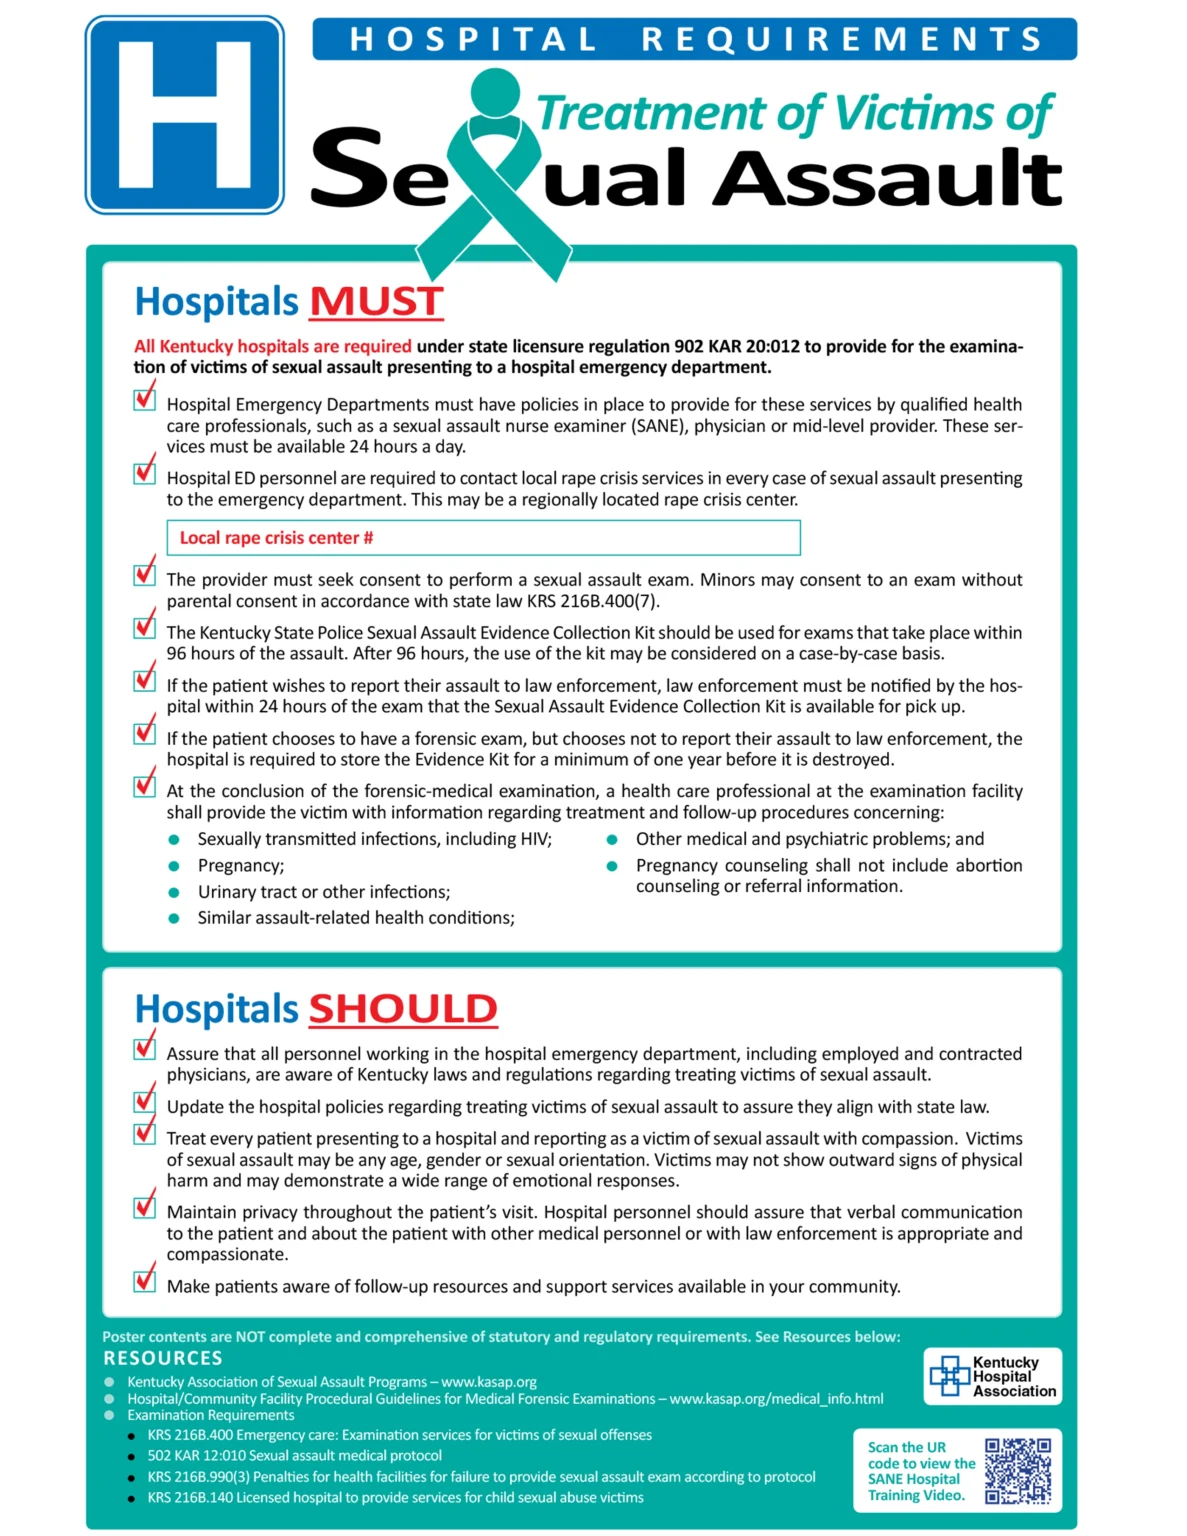 Treatment of Victims of Sexual Assault poster